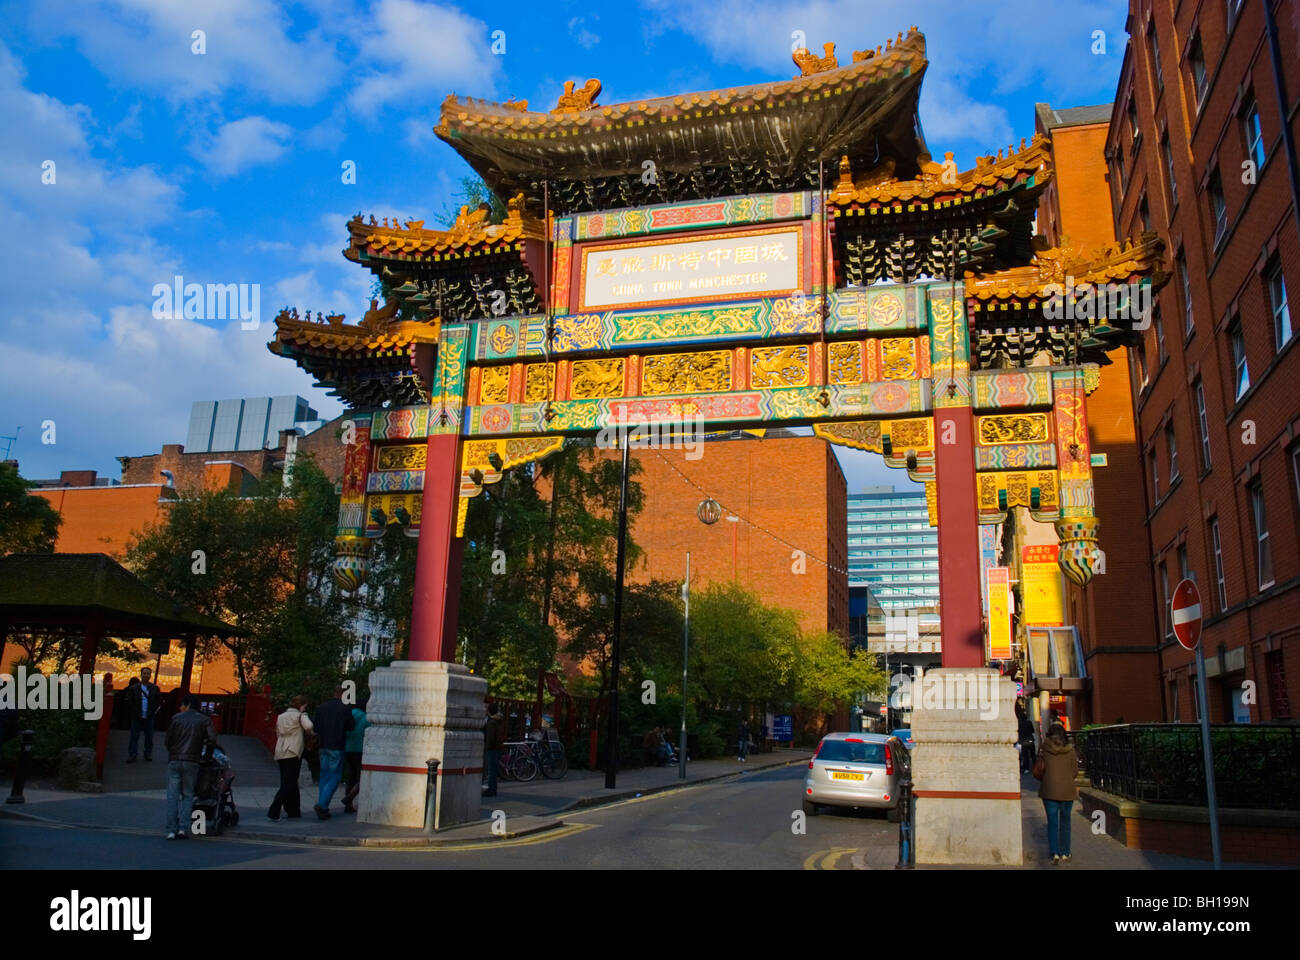 Chinese Arch Chinatown central Manchester England UK Europe Stock Photo